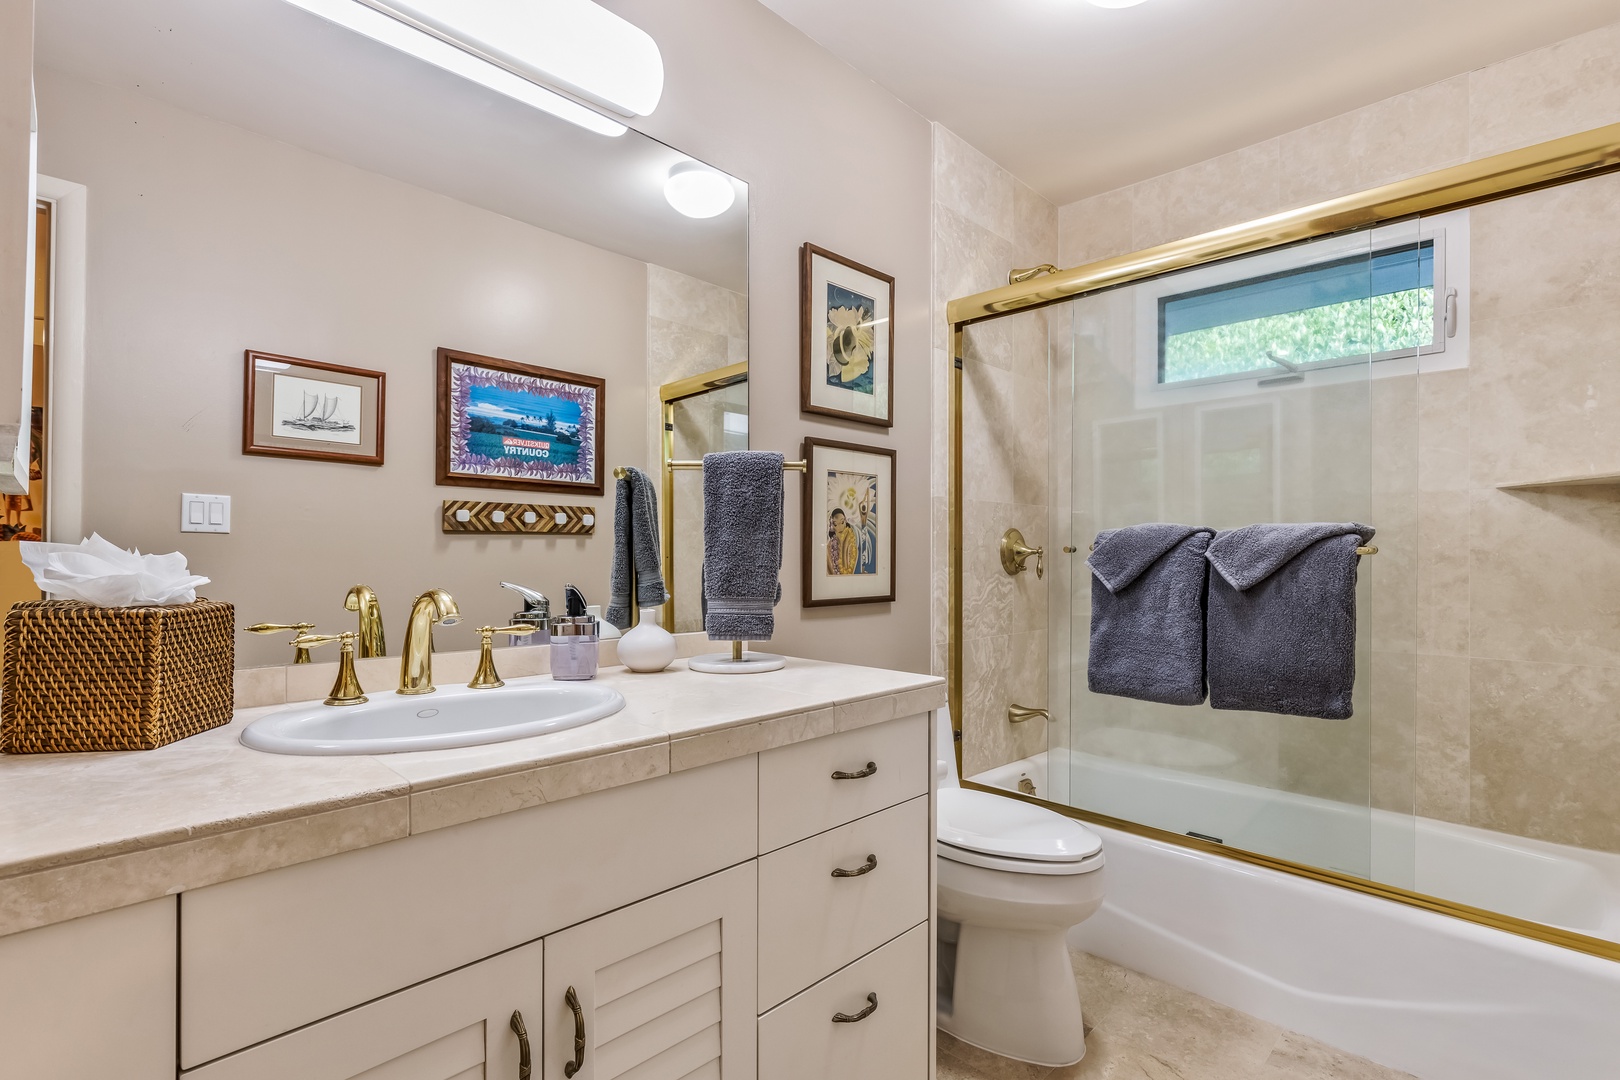 Honolulu Vacation Rentals, Hale Ola - Queen beds room ensuite has a tub perfect for kids